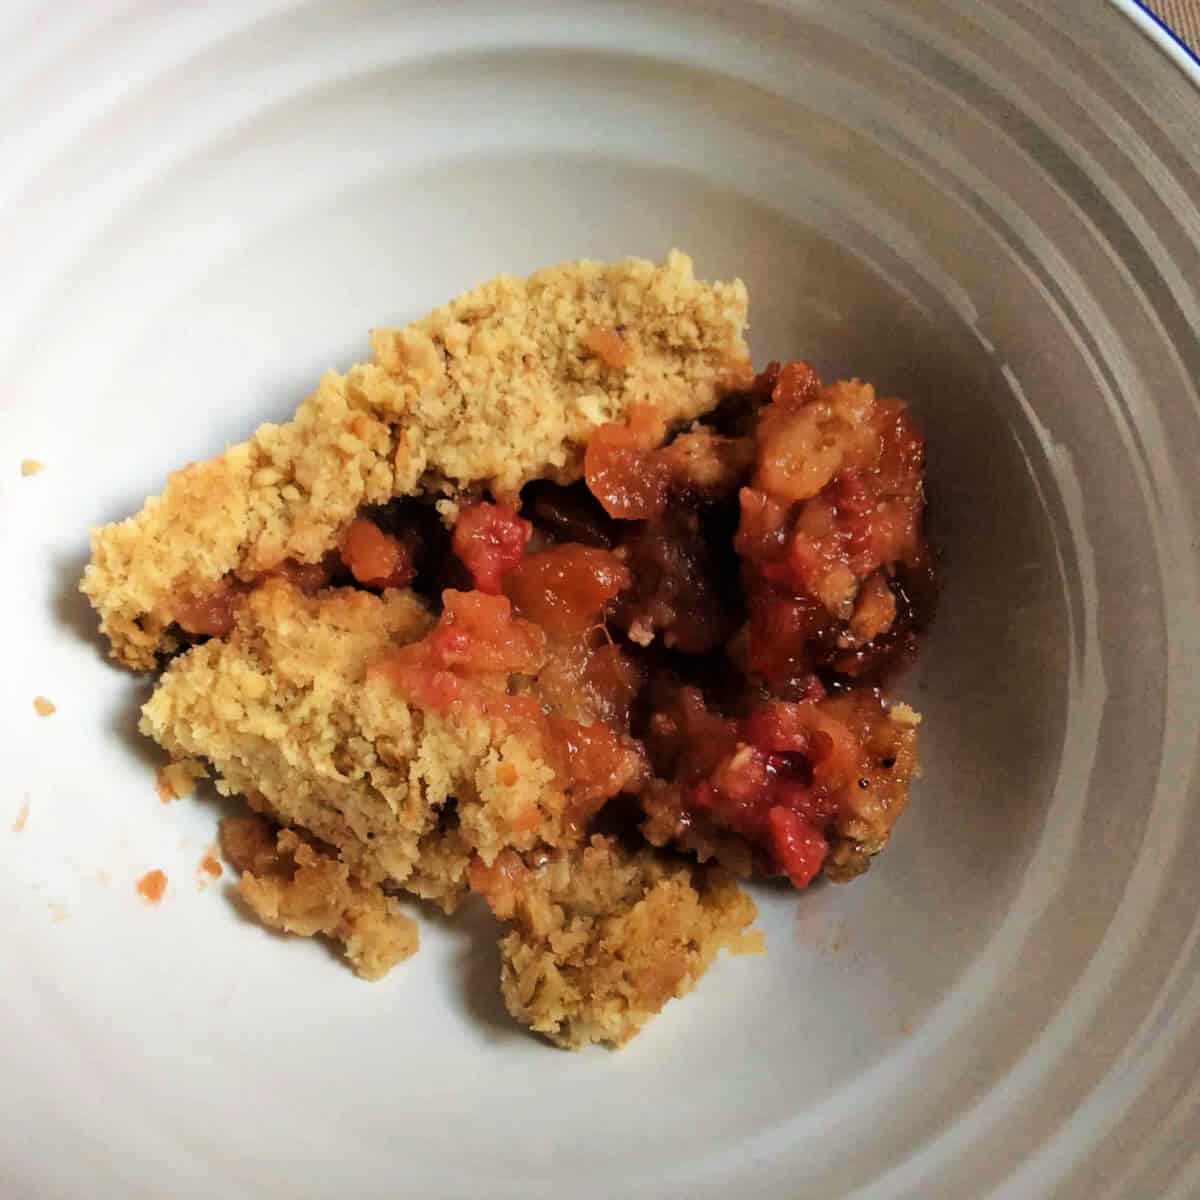 Bowl of slow cooker raspberry crumble, served.